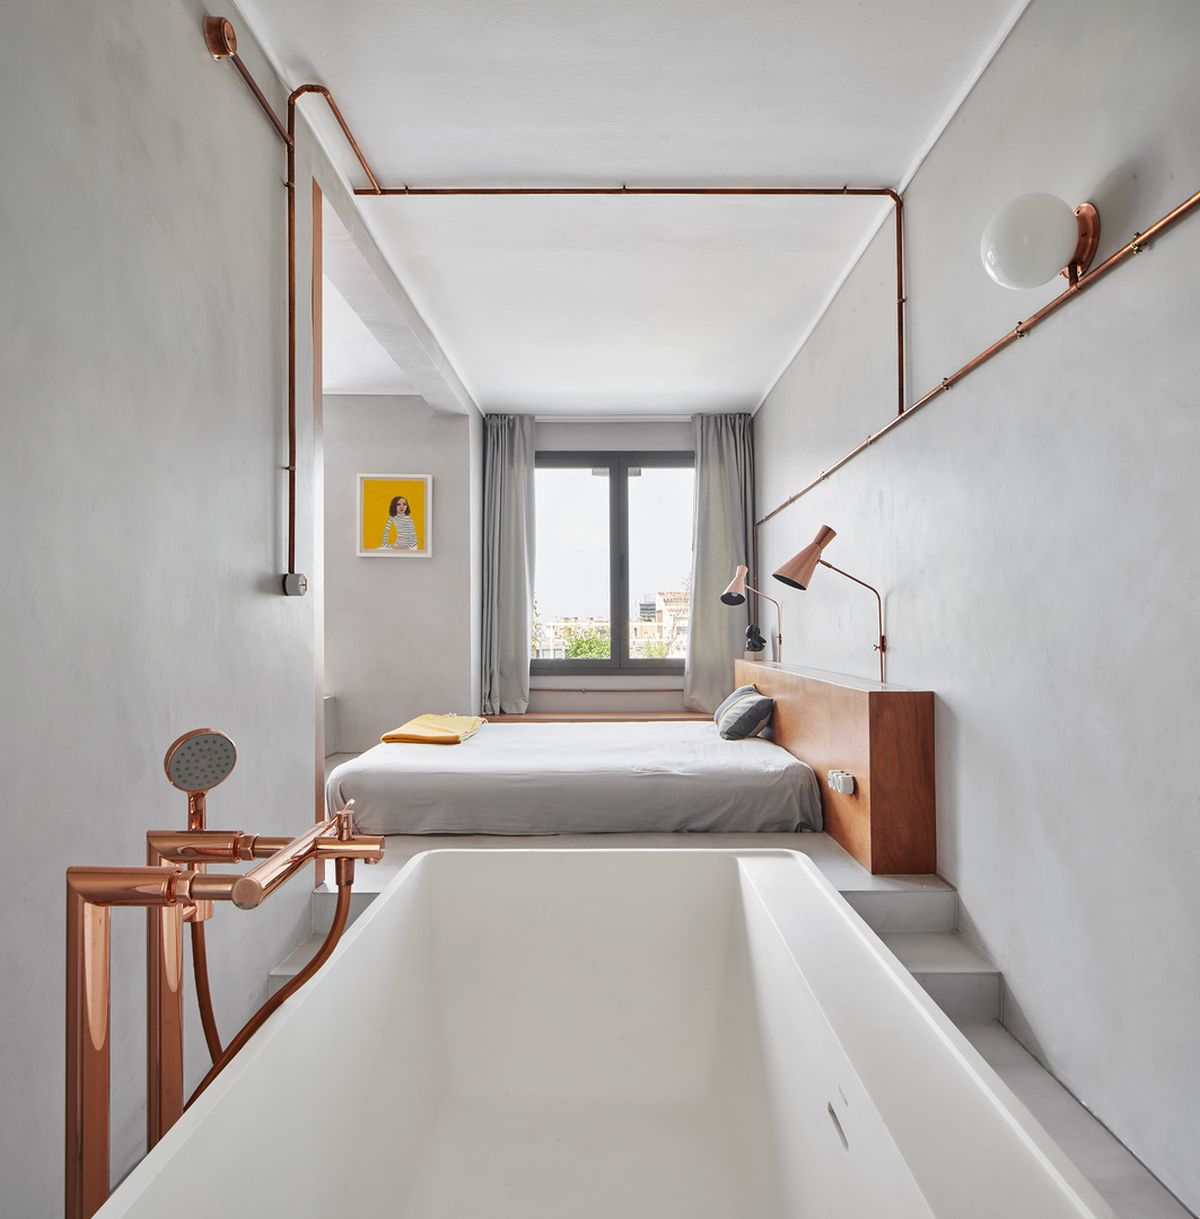 The bathroom is placed next to the bedroom, with a bathtub and elegant hardware